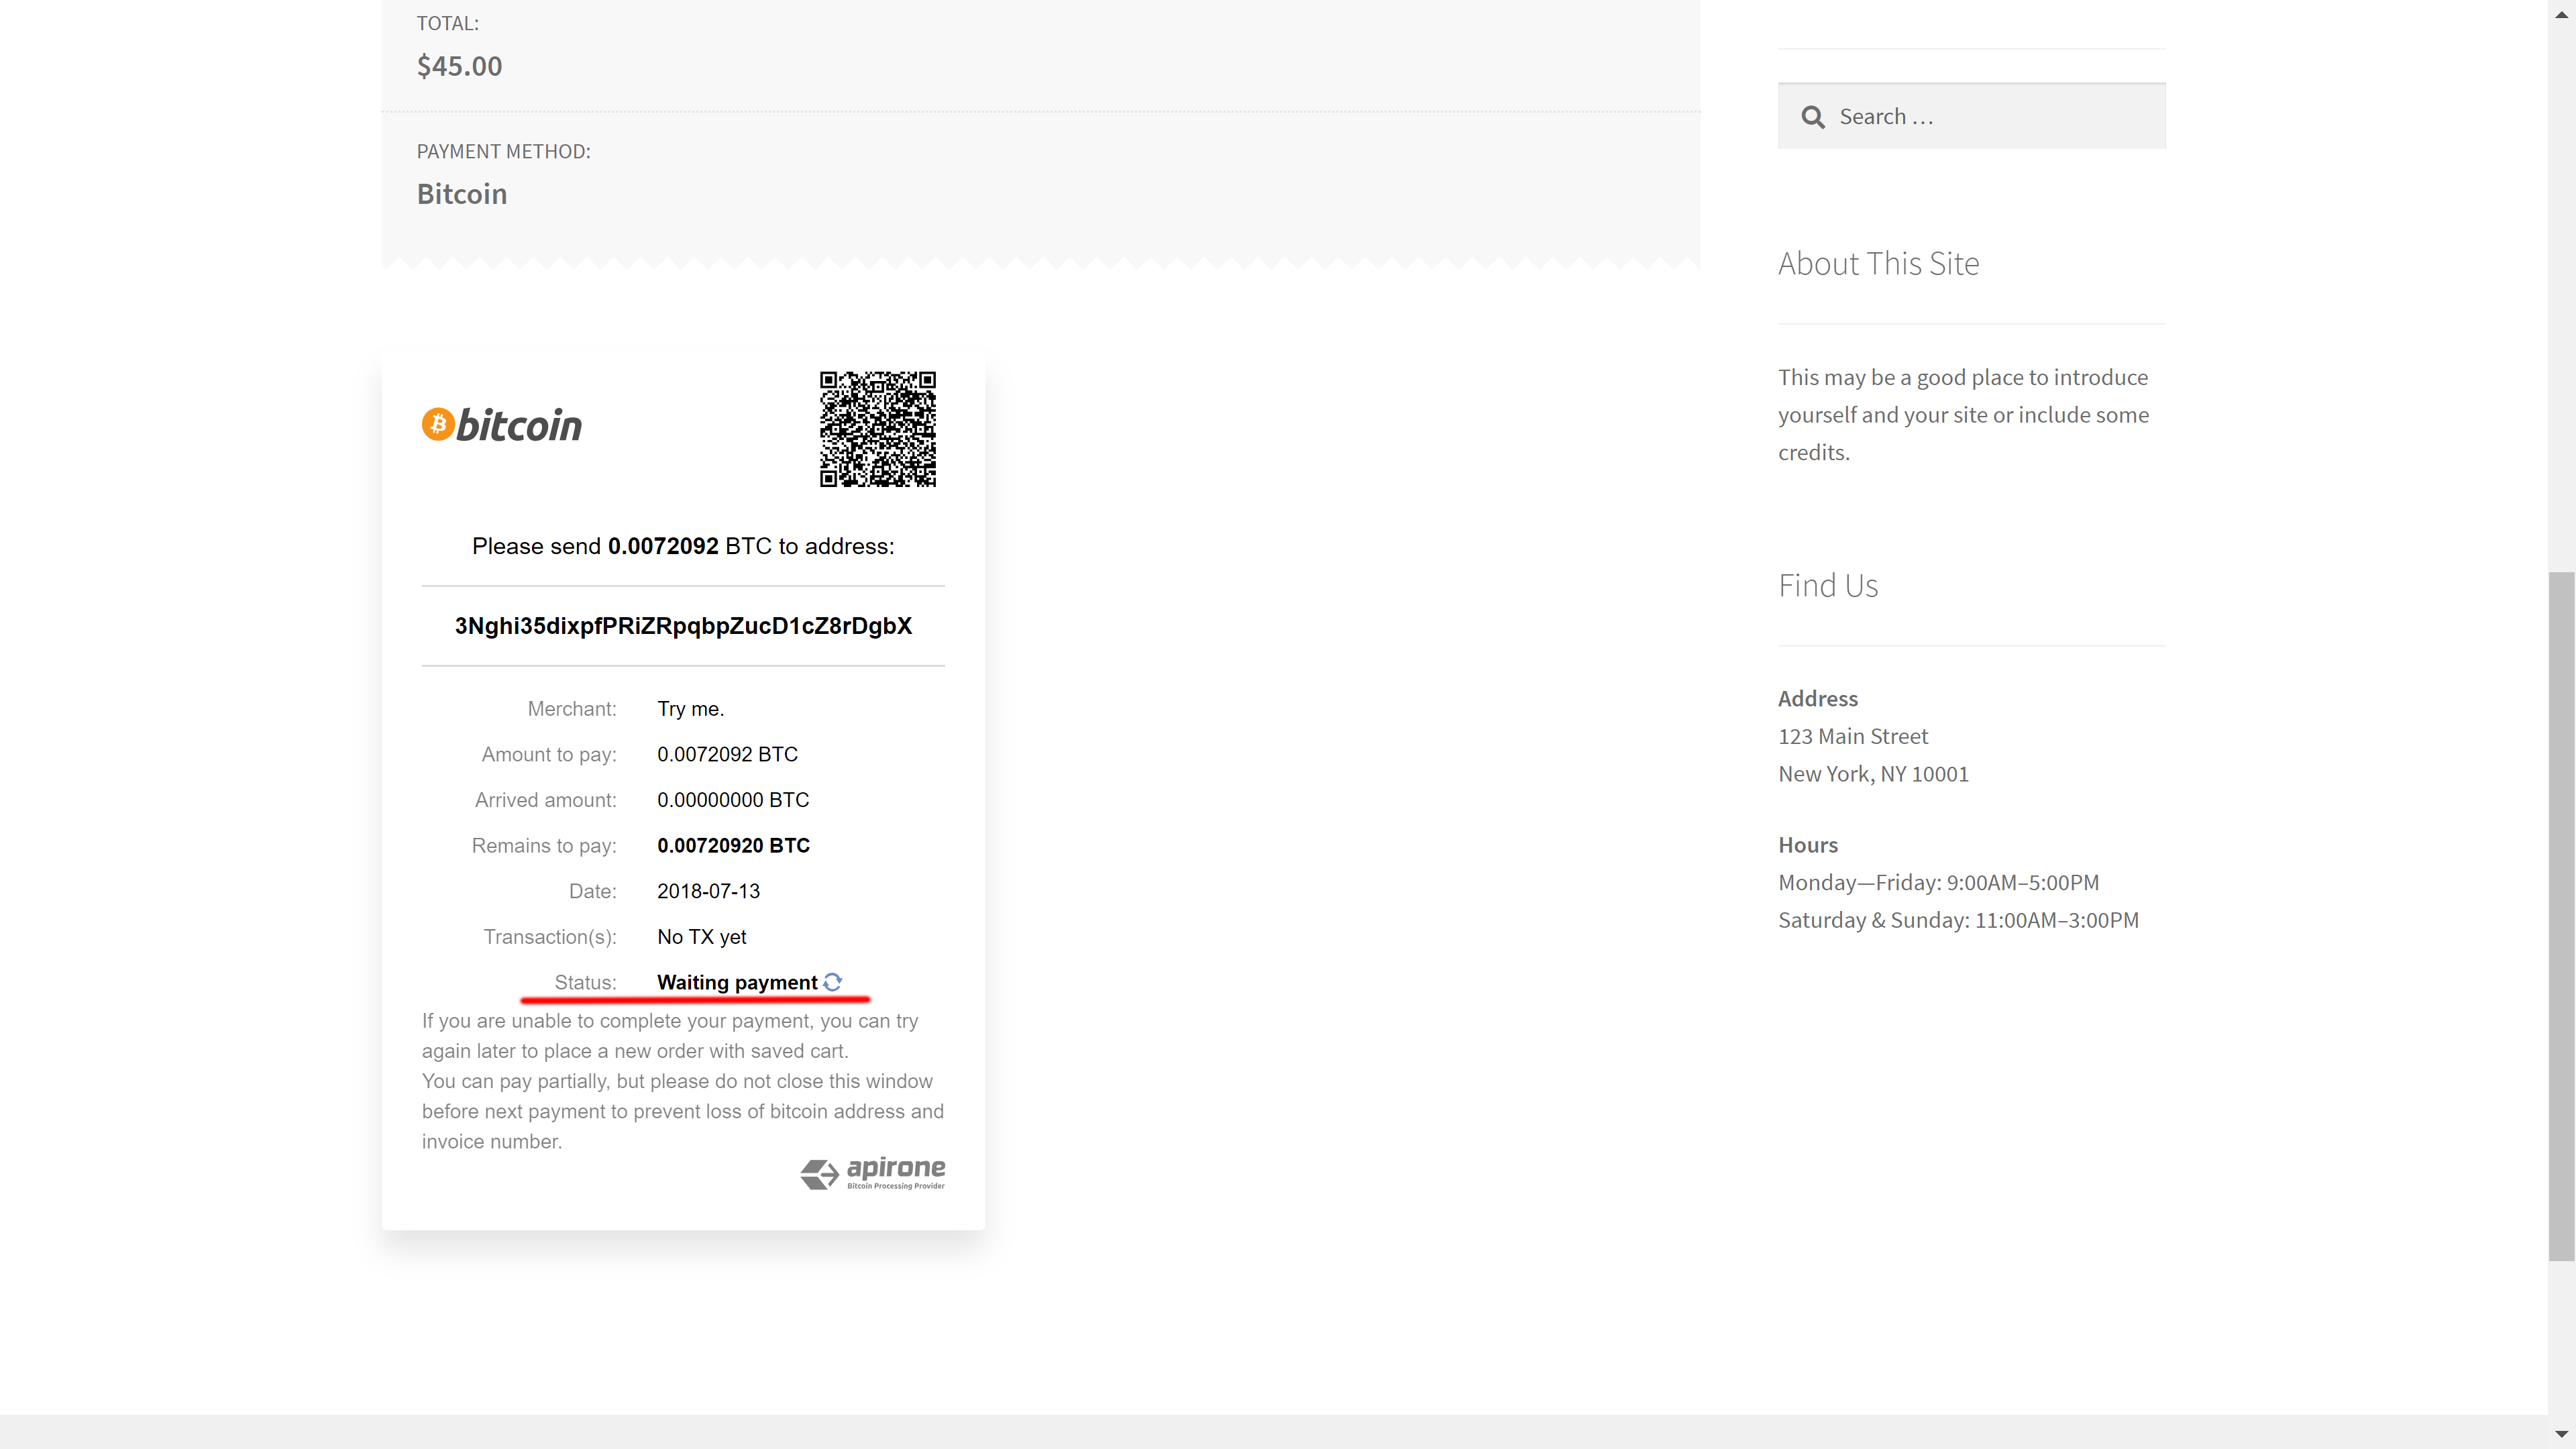 Integrated payment details onto the WooCommerce page. Status of payment in real-time